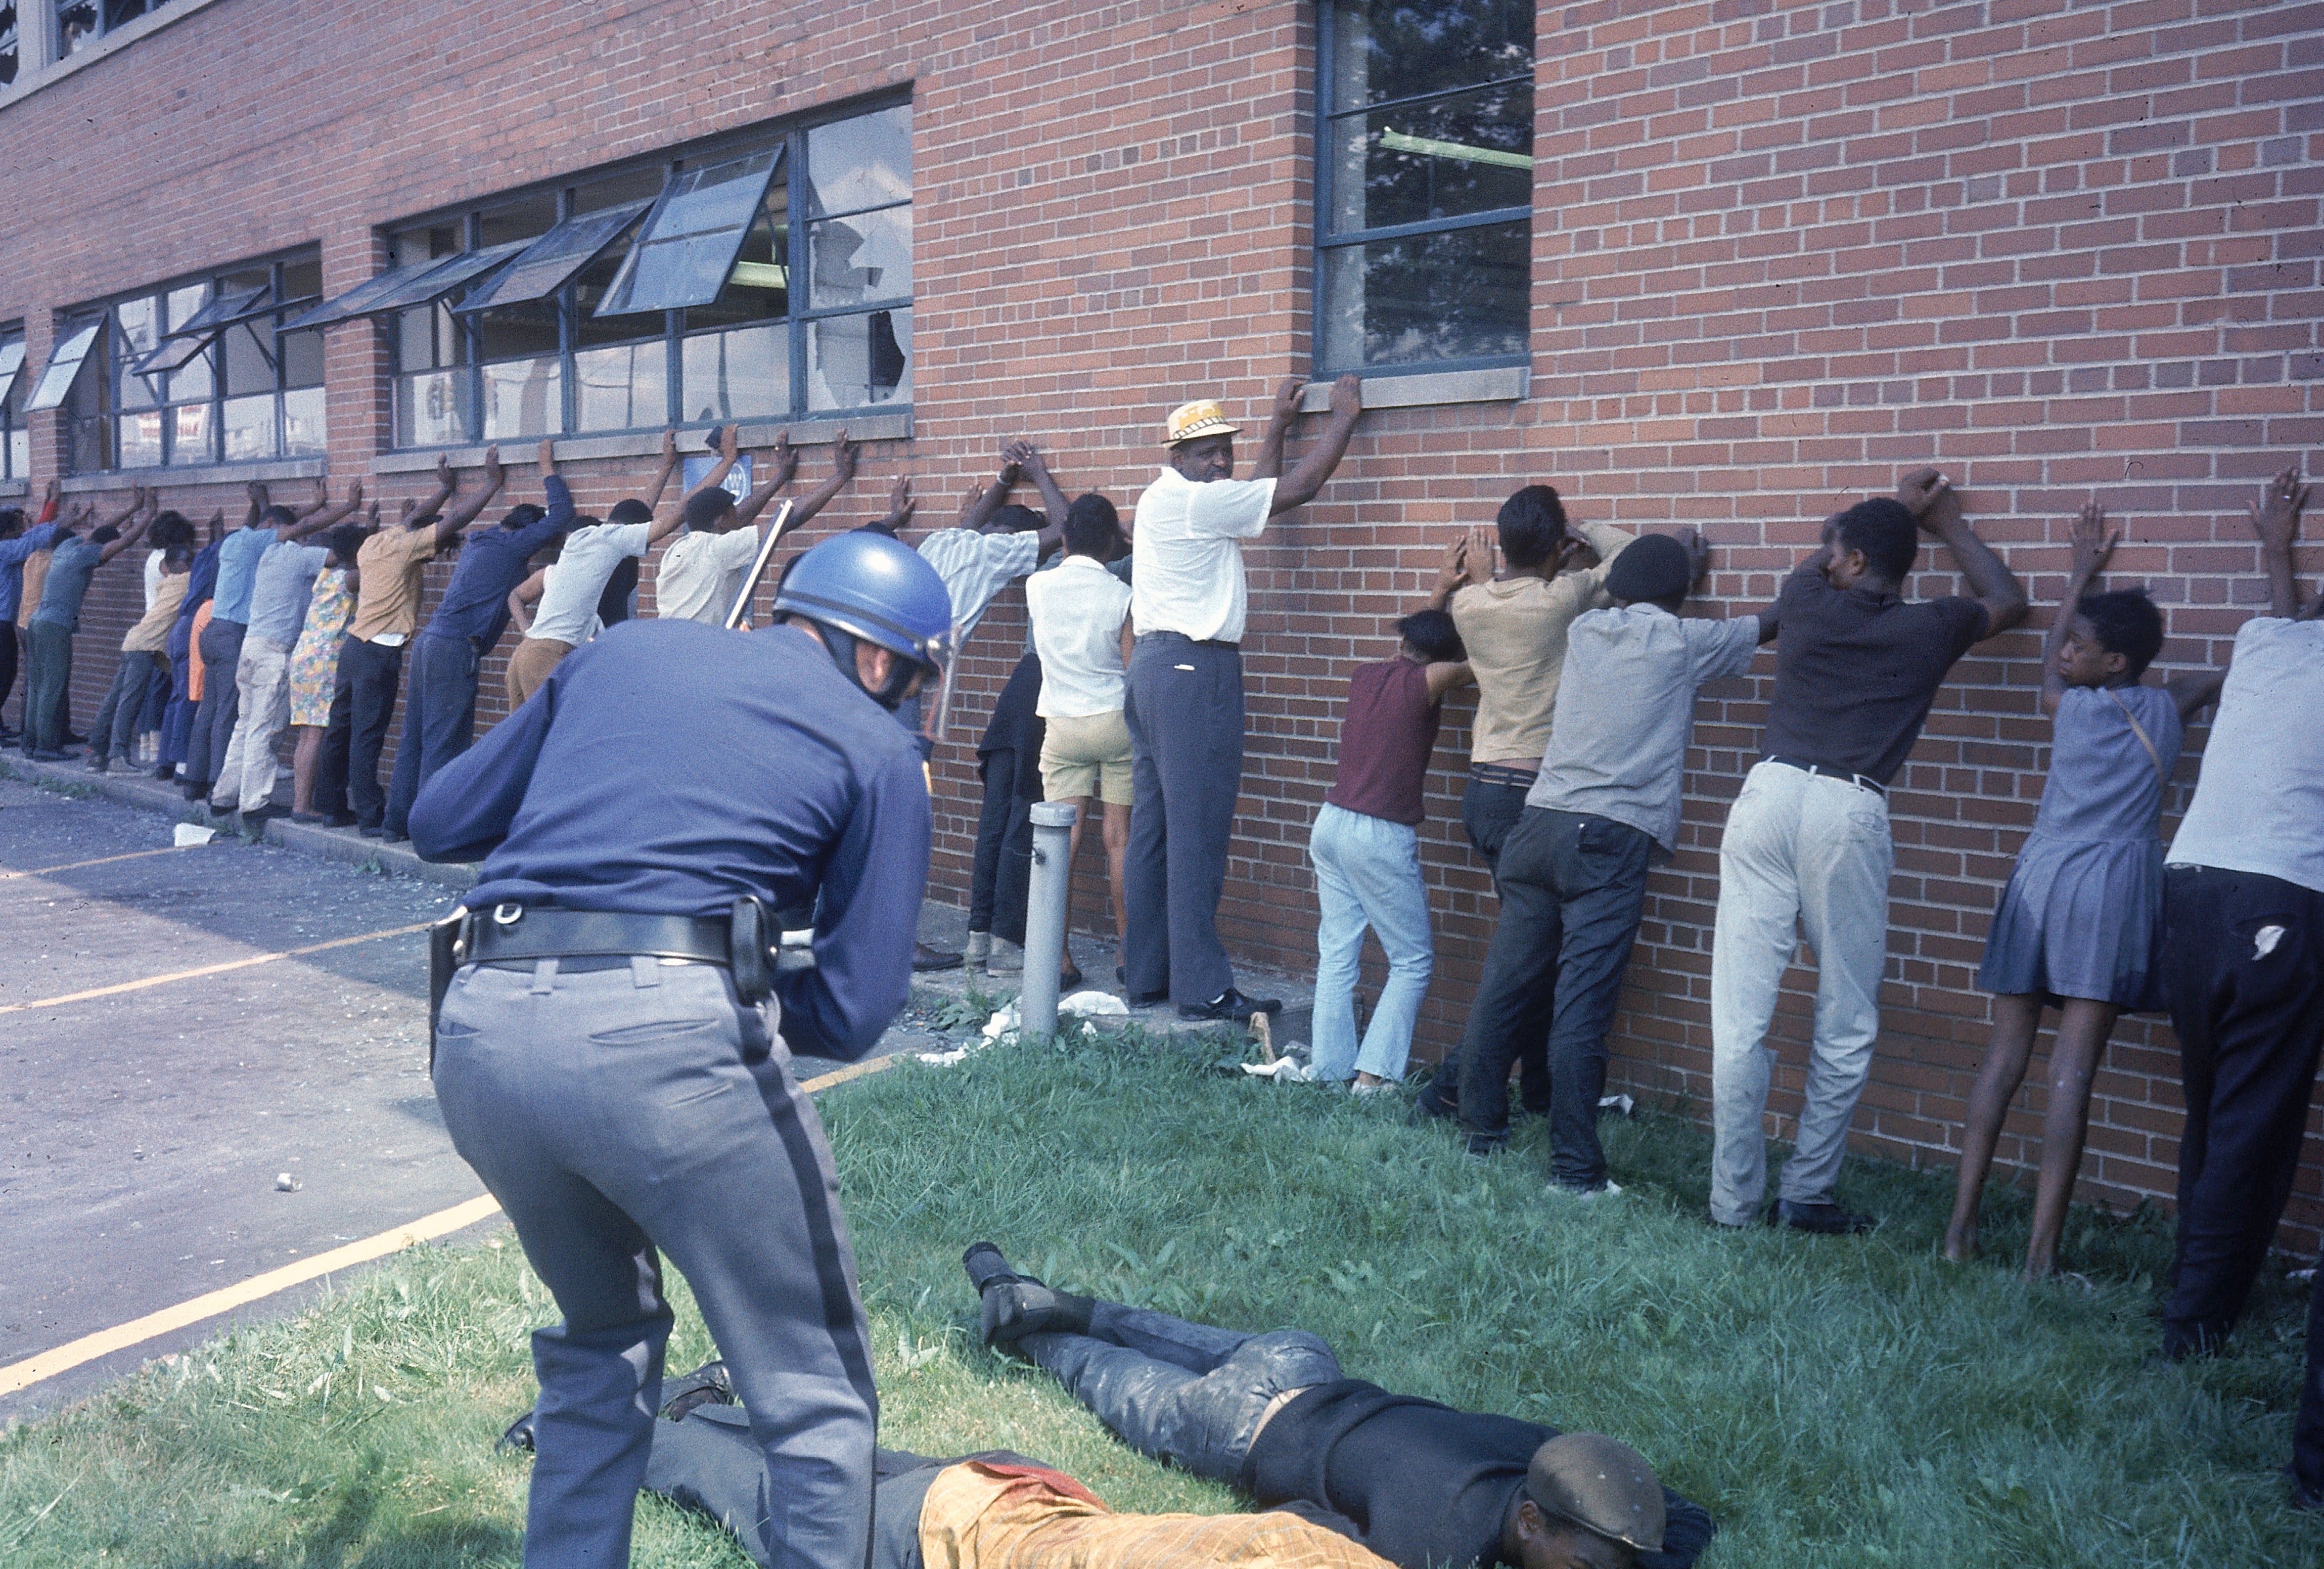 'Detroit:' The Real Story Behind One Of The Most Horrific Police Brutality Events In History
